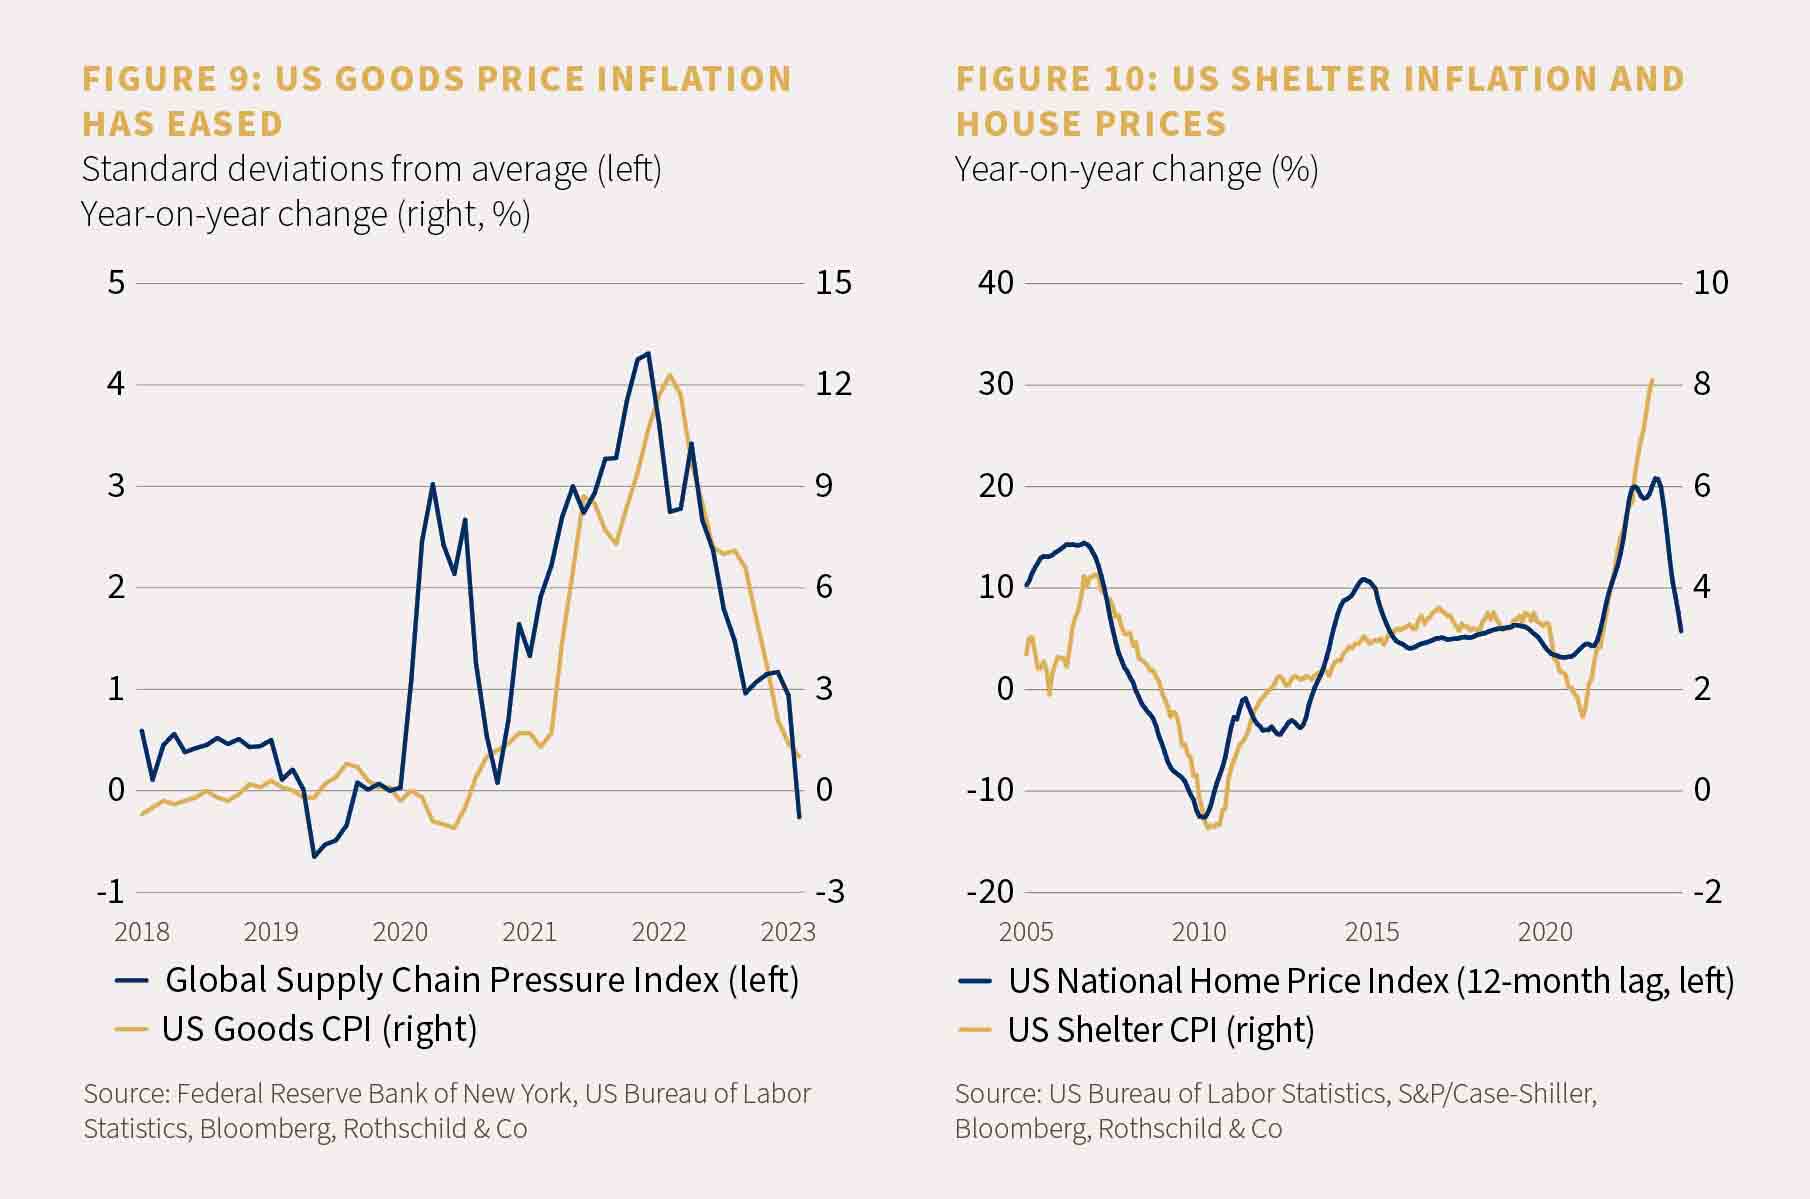 Chart showing US goods price inflation easing and chart showing US shelter inflation and house prices